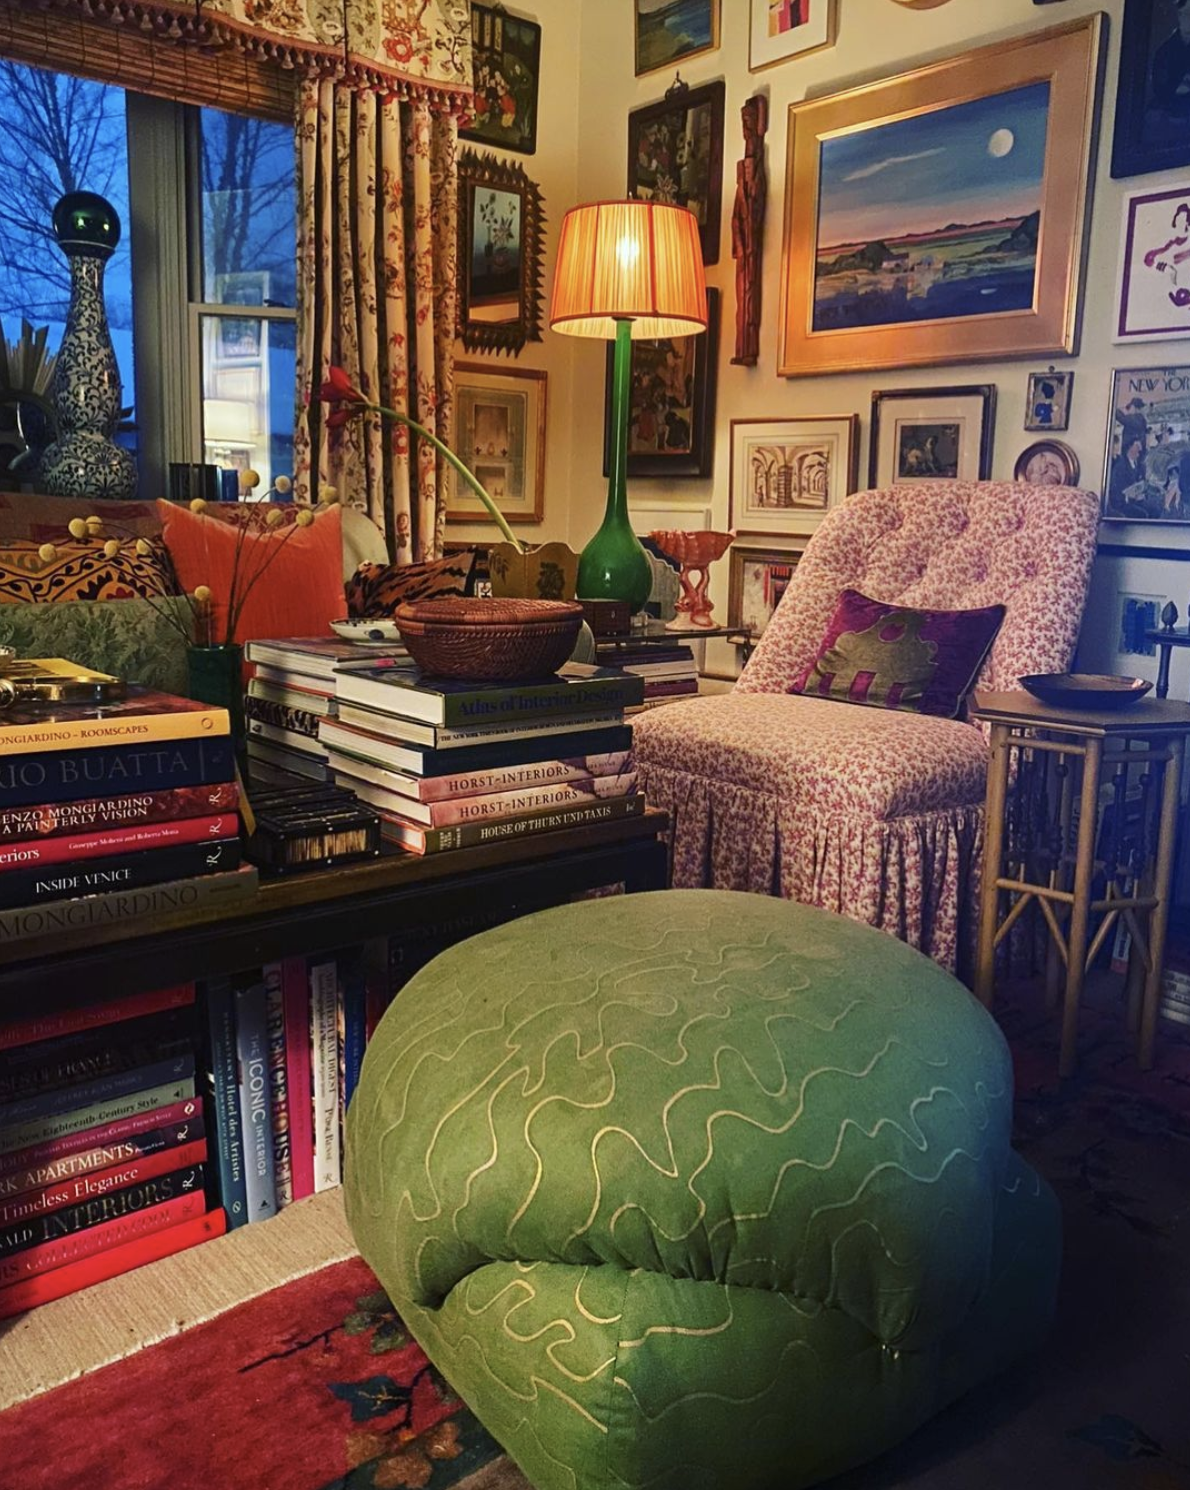 Cluttercore - love this cozy corner filled with art, books and prized possessions 